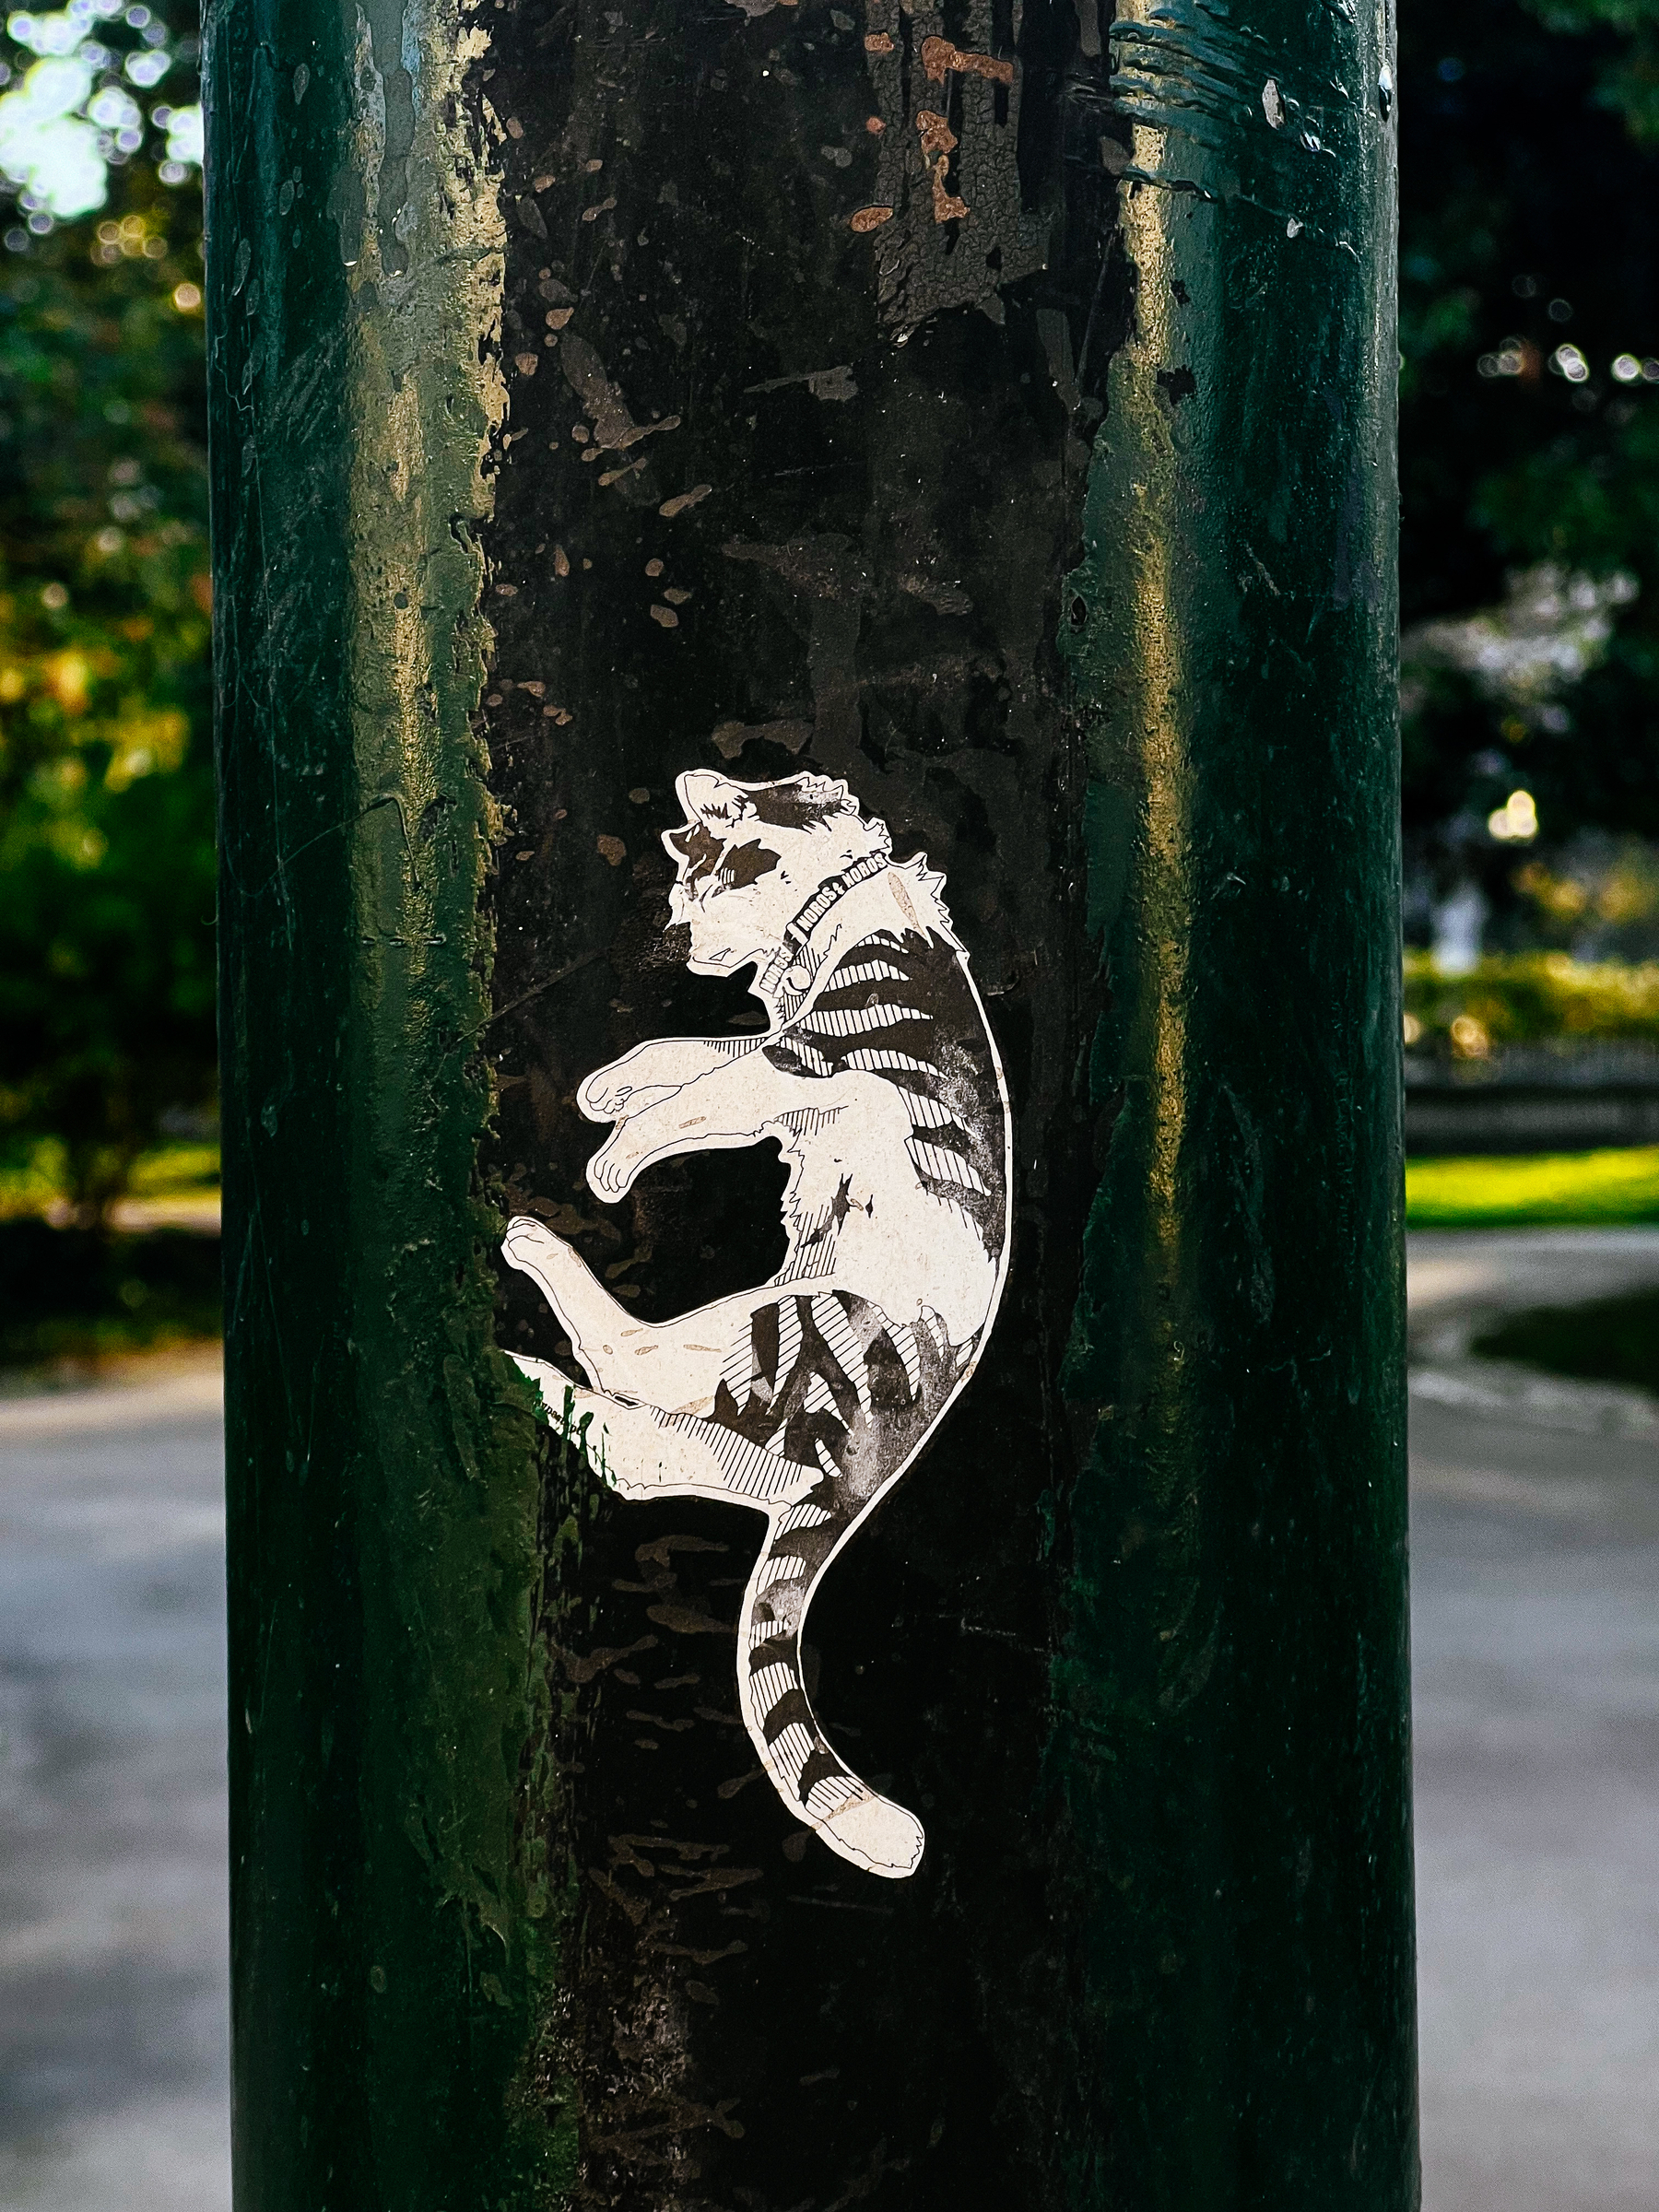 A weathered sticker depicting a striped cat in a playful pose is adhered to a chipped and scratched green pole, set against a blurred background of greenery.